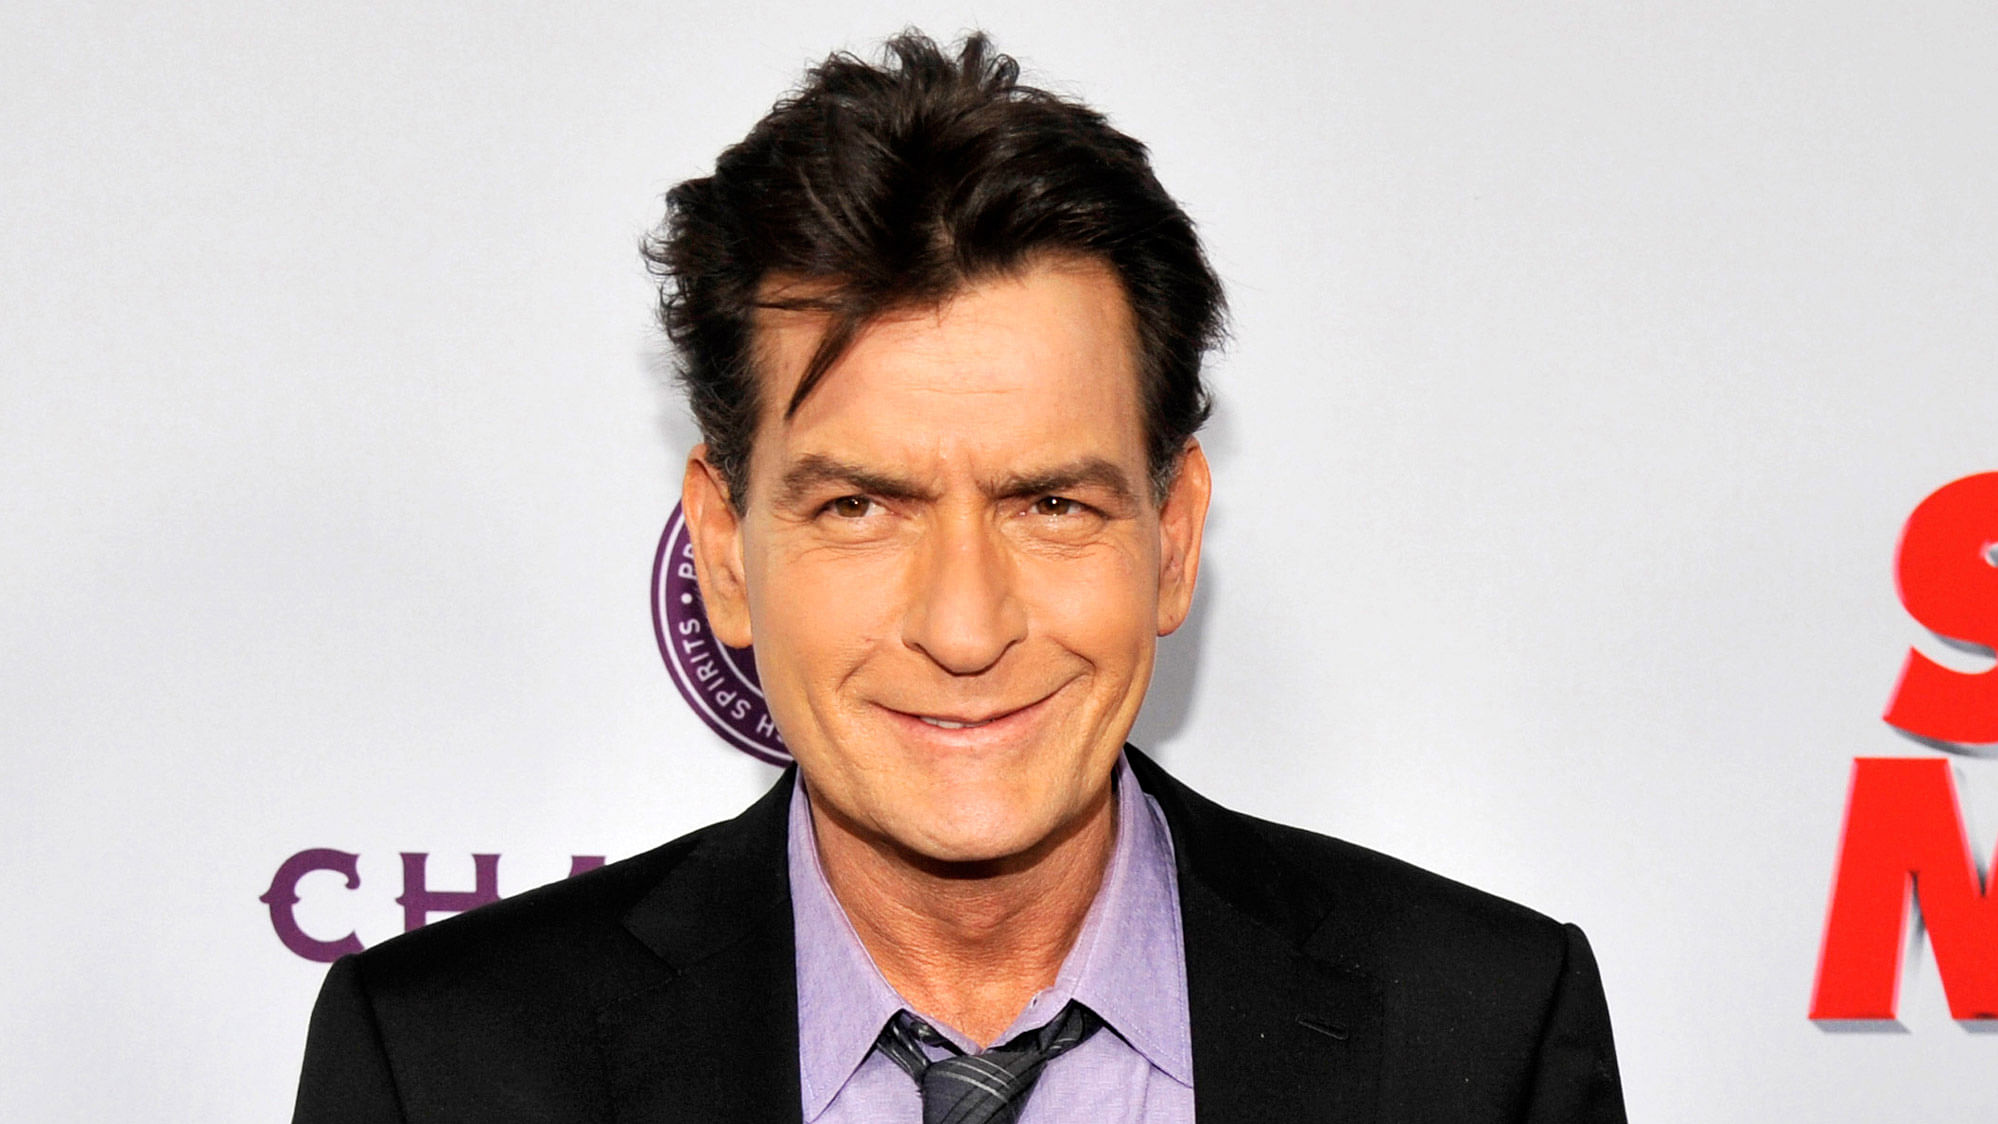 Actor Charlie Sheen at the premiere of Scary Movie 5, 2013. (Source:AP)